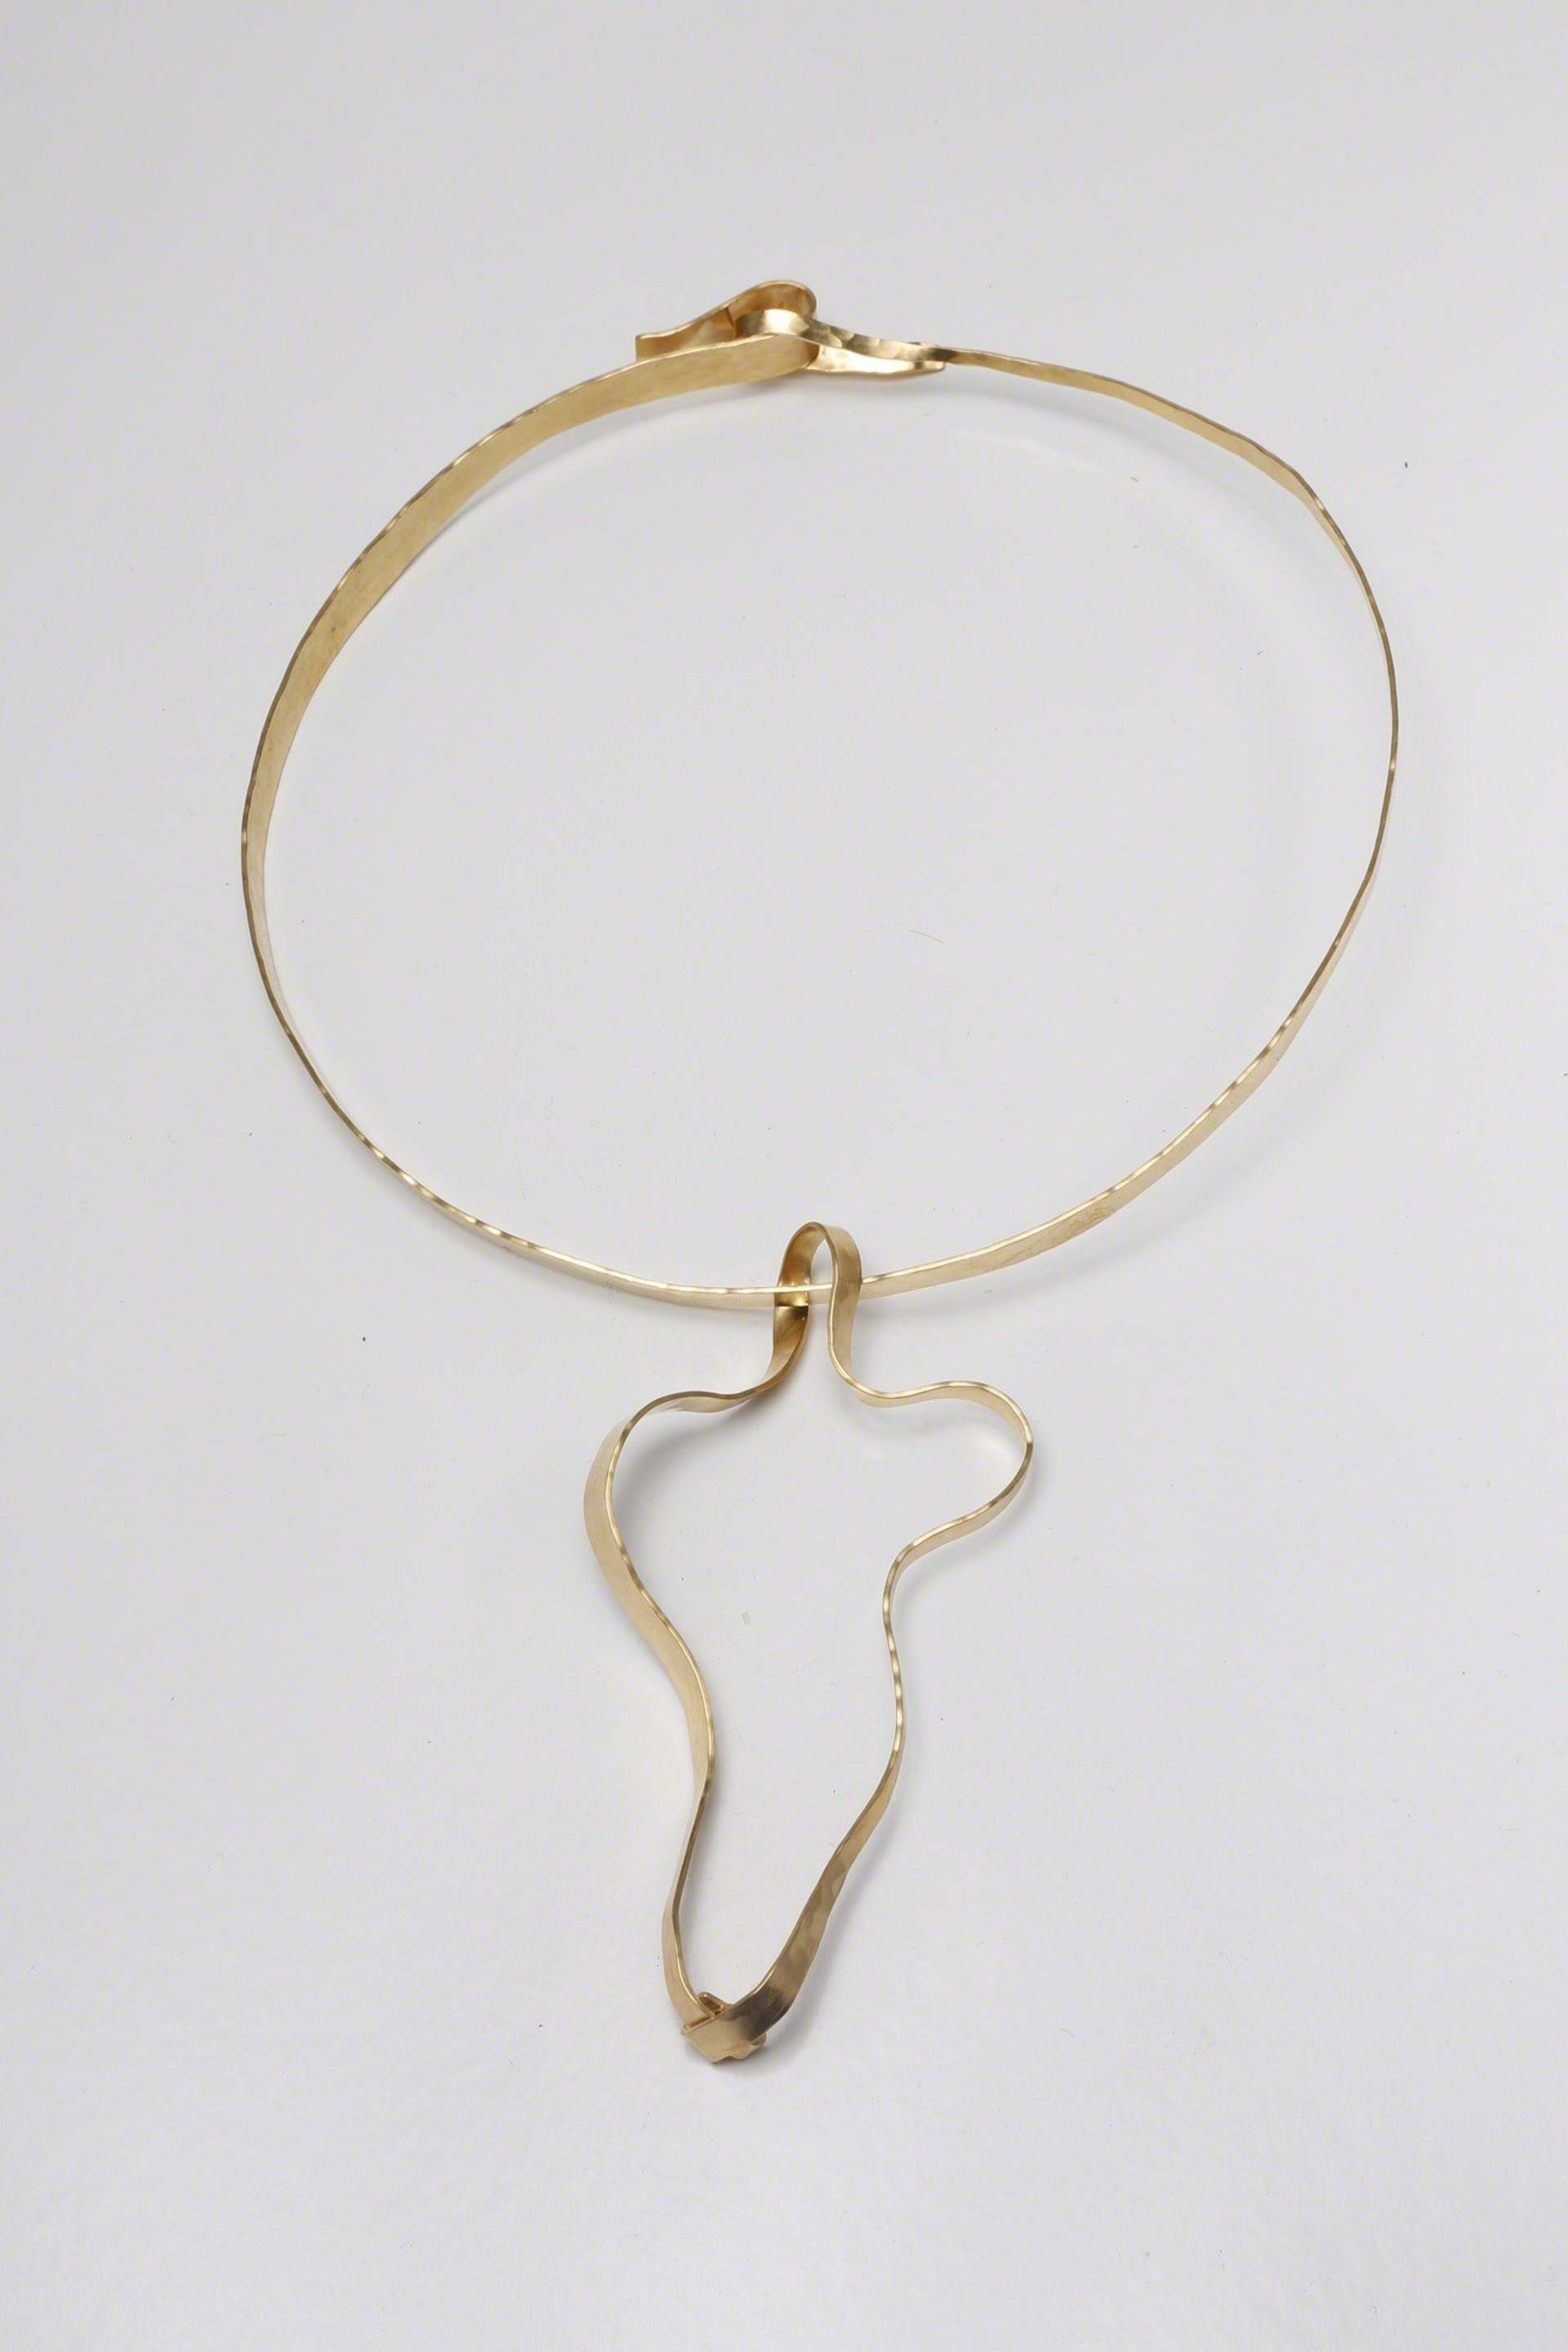 "Petite Waves" Necklace by Jacques Jarrige